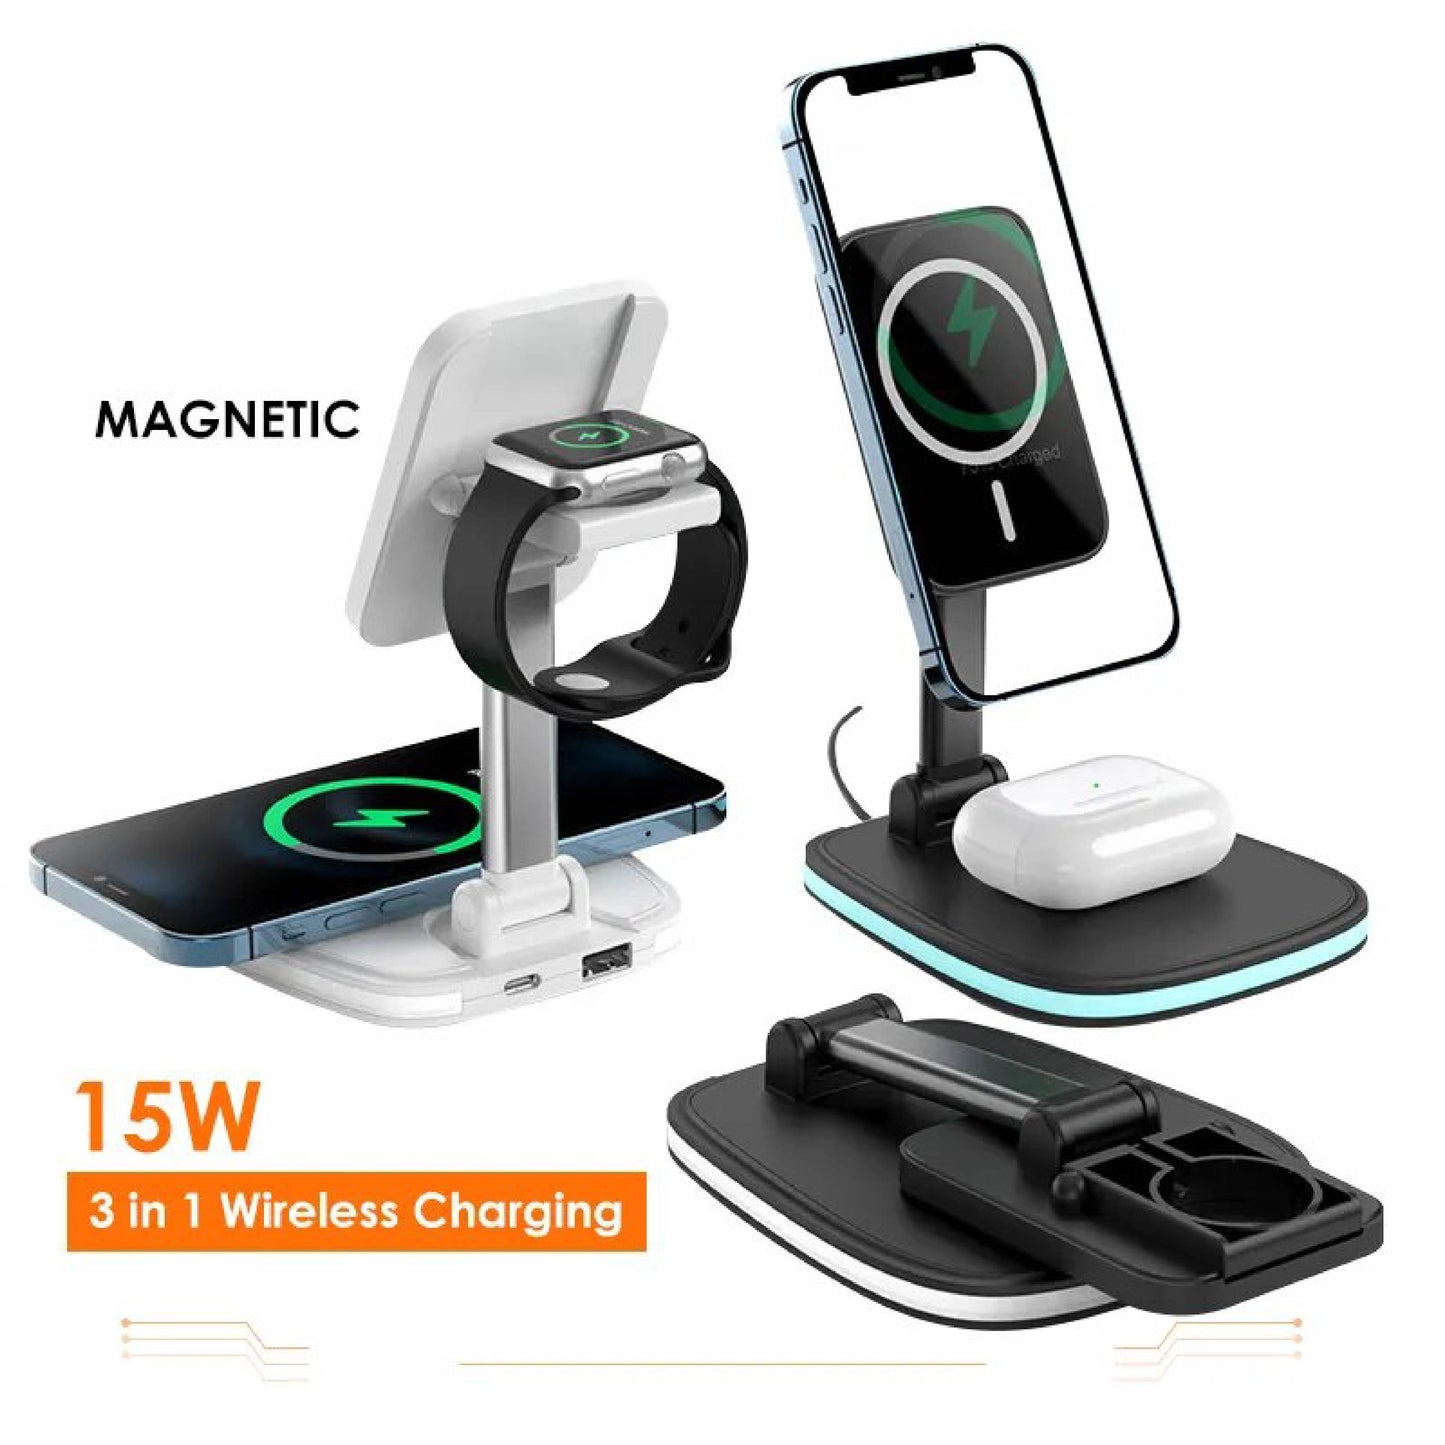 3 IN 1 Foldable Stand Charger (without iWatch charger)